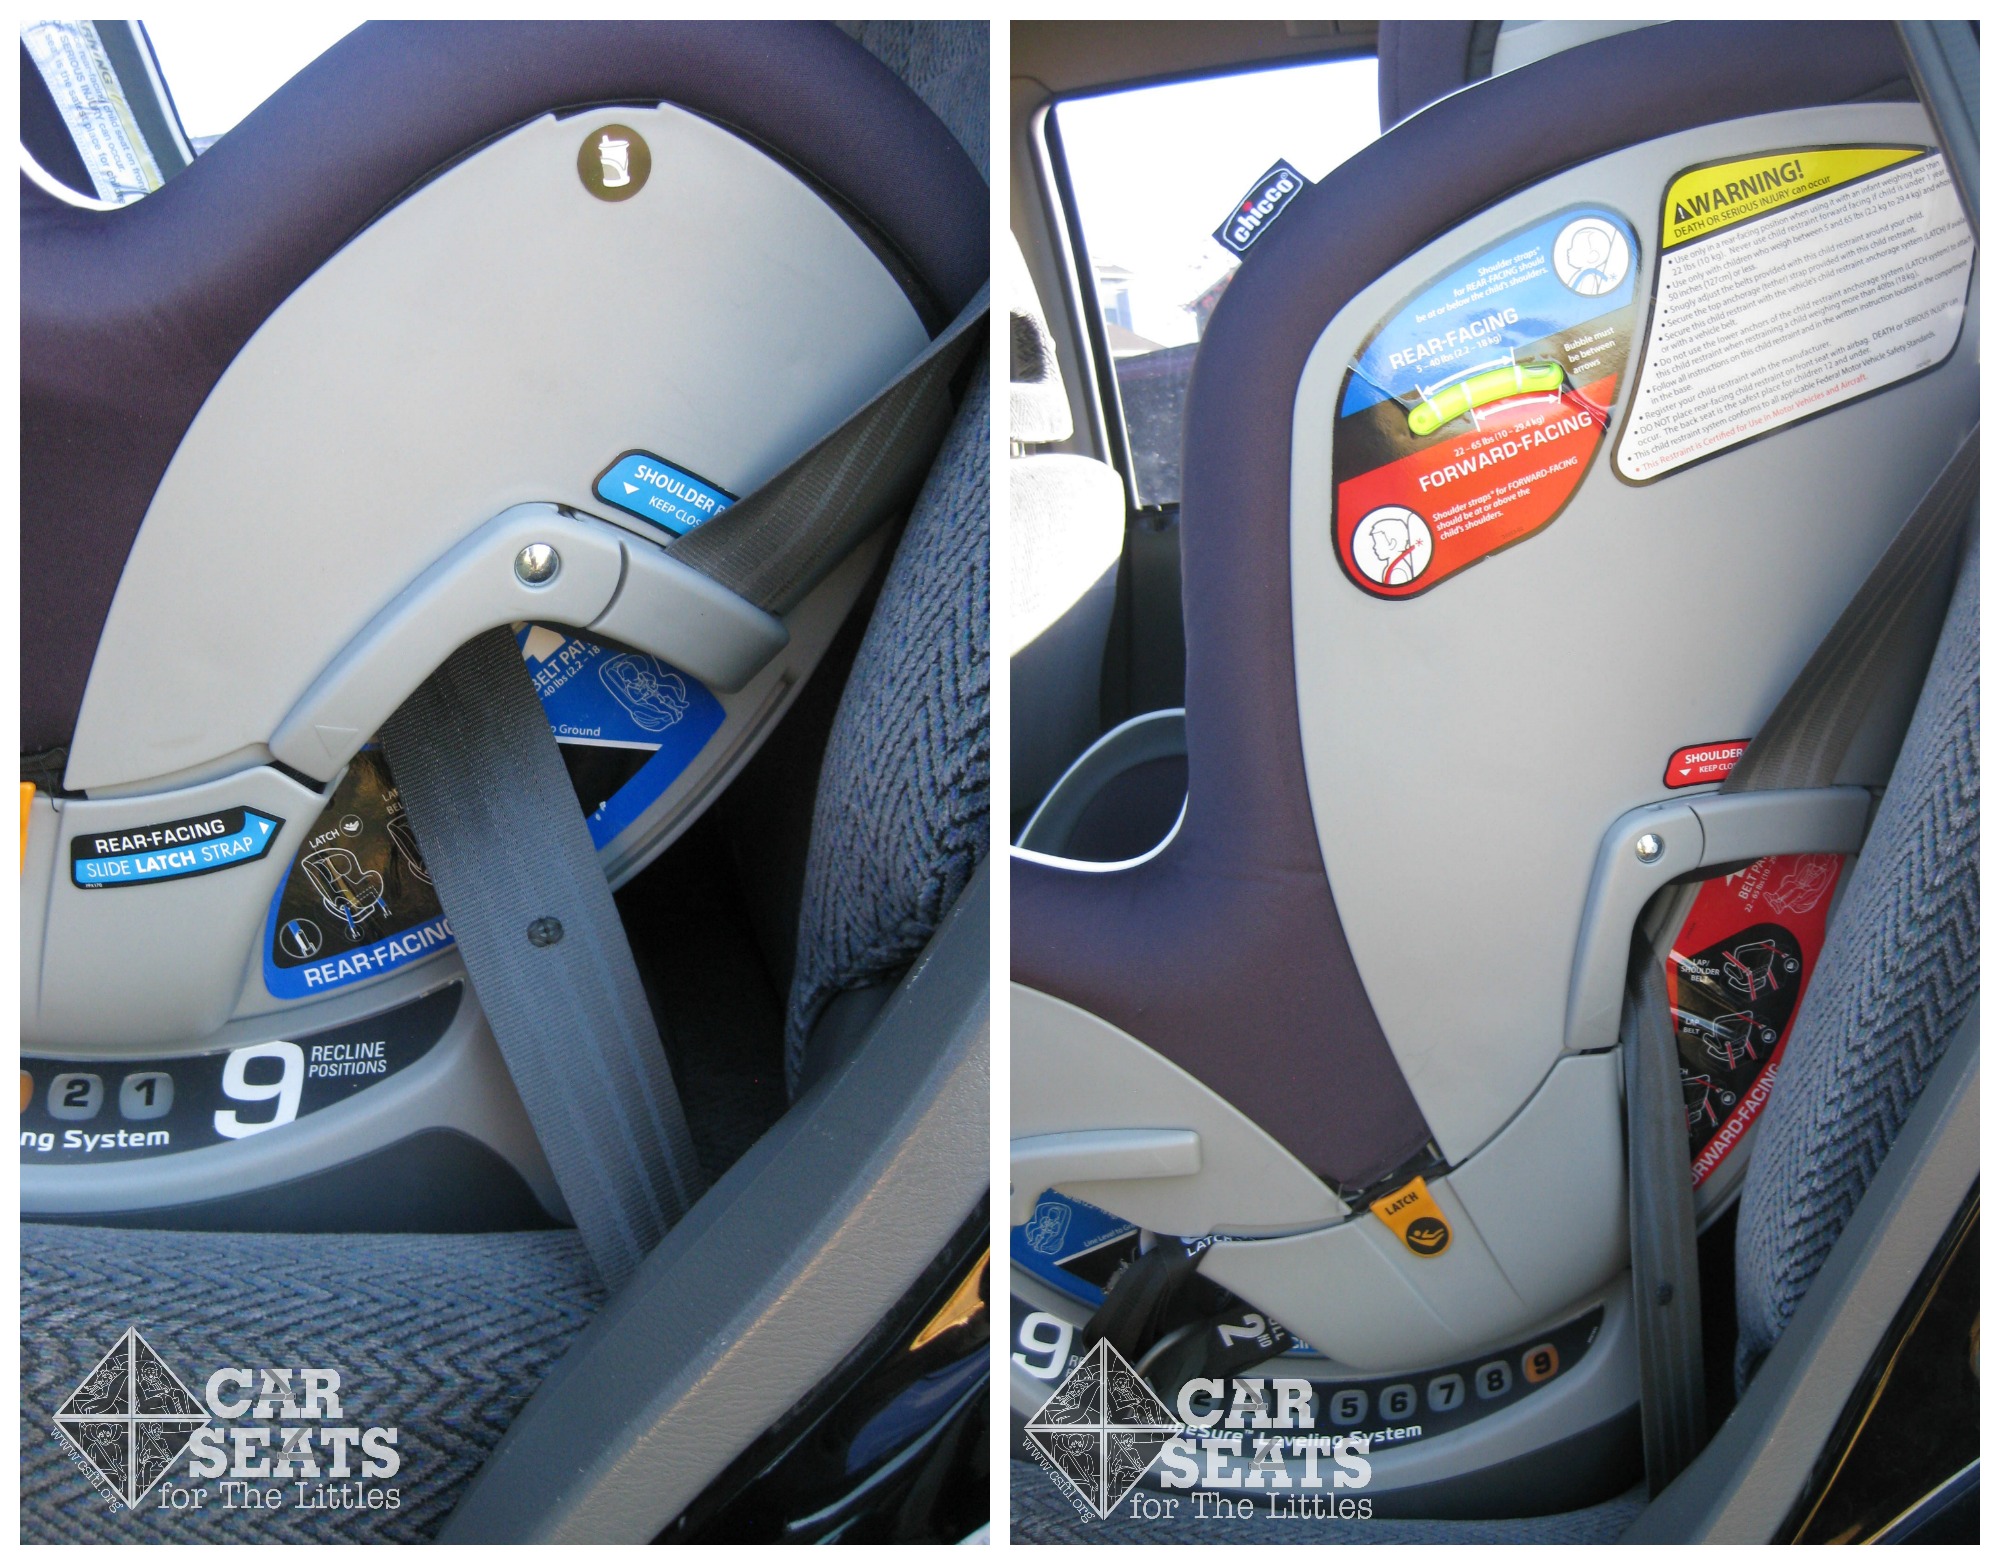 Chicco Nextfit Review Car Seats For The Littles - How To Install Chicco Nextfit Car Seat Forward Facing